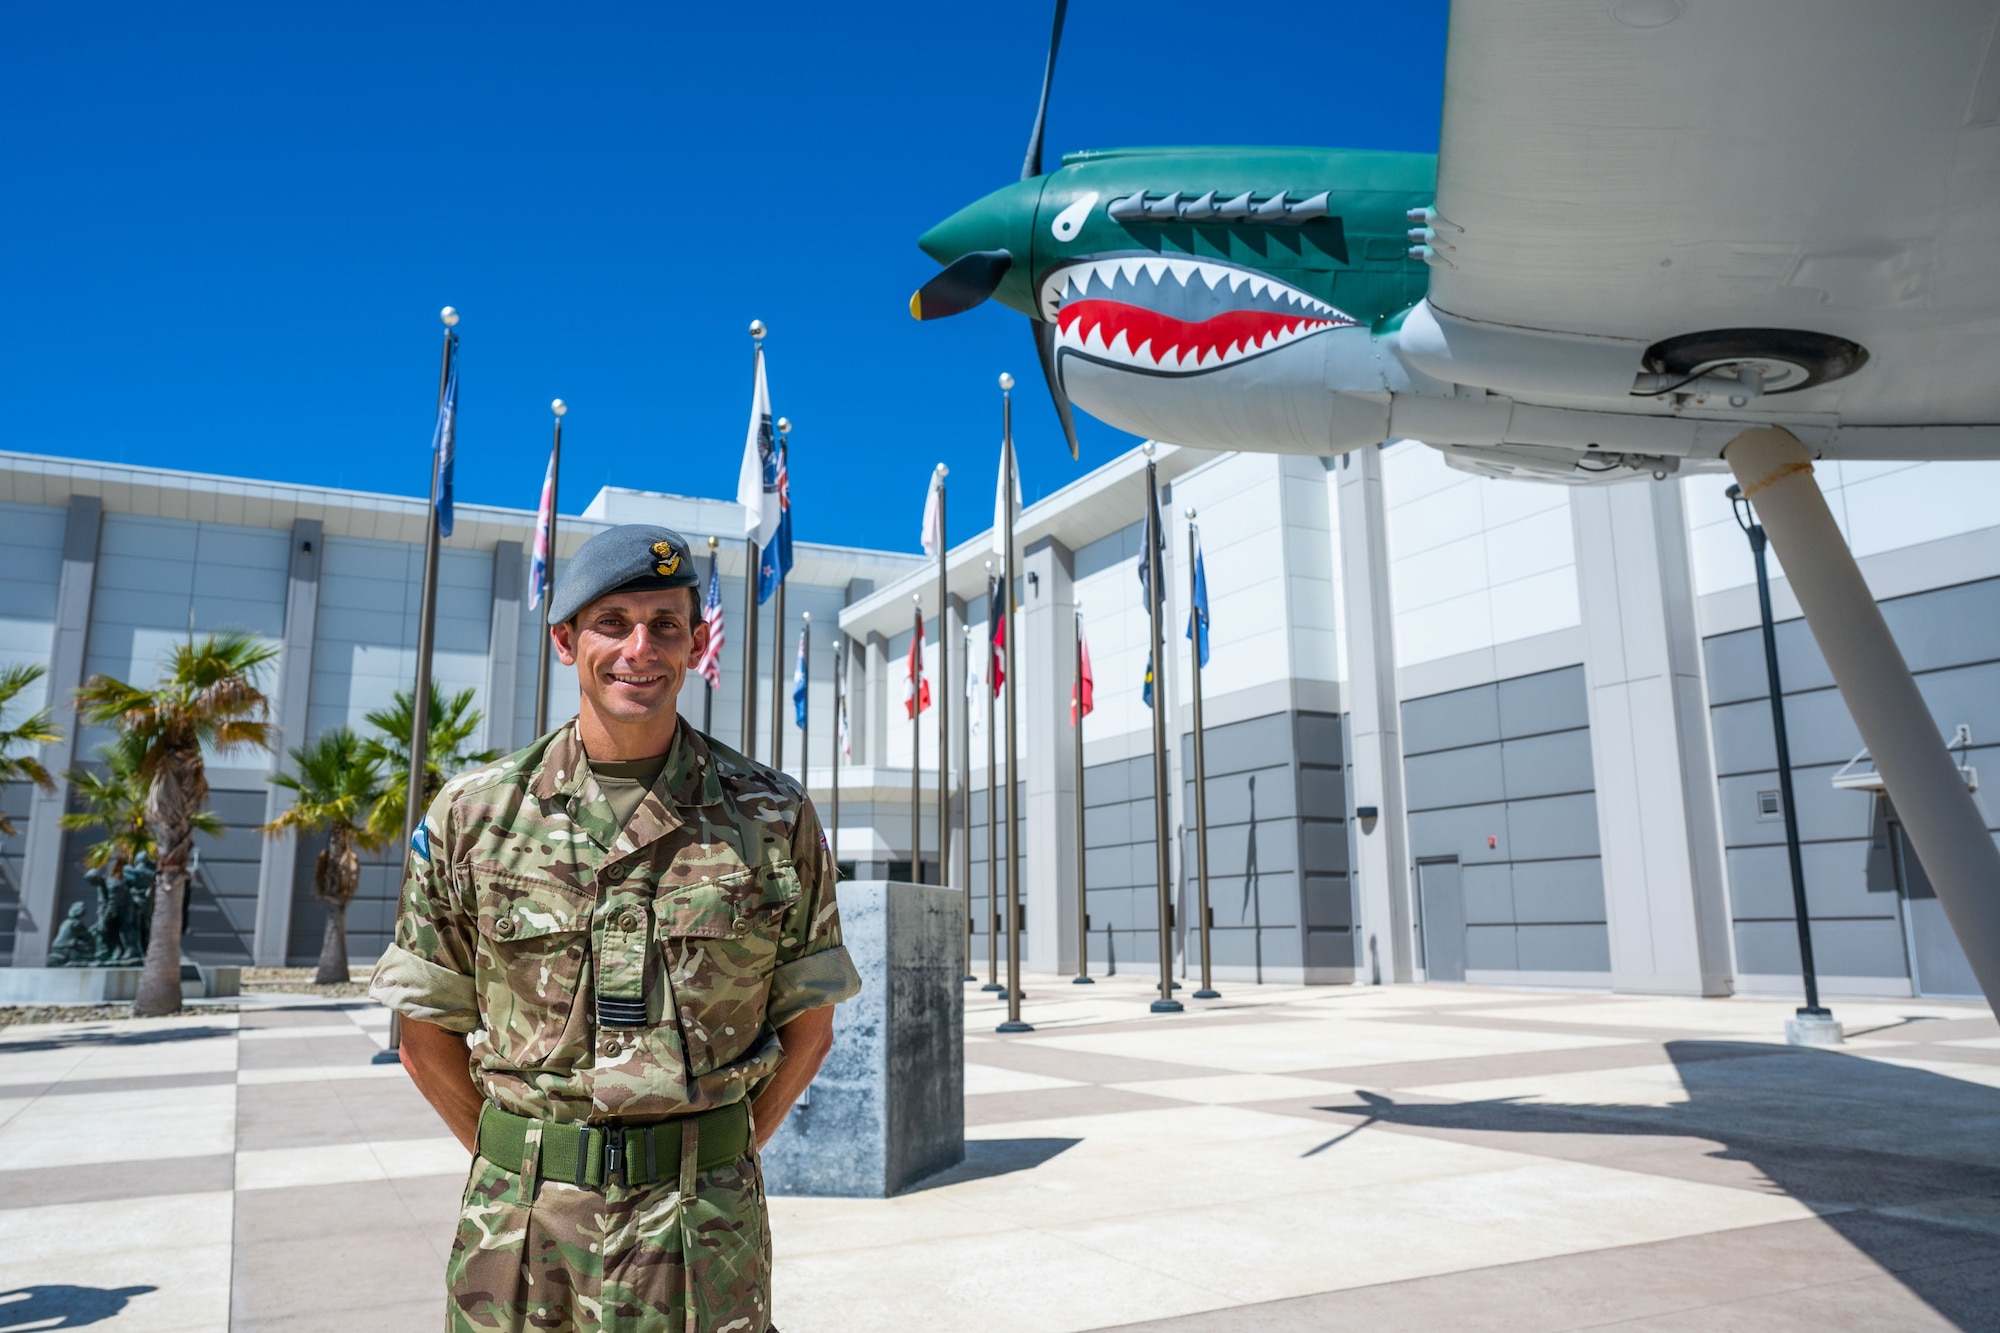 Flt. Lt. Christopher Atkin, Royal Air Force Space intelligence officer and Great Britain exchange officer, stands in front of the Combined Force Space Component Command headquarters, which is co-located with the Combined Space Operations Center (CSpOC) at Vandenberg Space Force Base, Calif., Aug. 29, 2023. Atkin, also serving as the Flight Commander of the Battlespace Intelligence Flight, Intelligence, Surveillance and Reconnaissance Division (ISRD), for the CSpOC, was the first coalition partner to complete the Senior Intelligence Duty Officer (SIDO) training course – an 80-hour academic course requisite aimed to teach the fundamentals for all SIDOs and tailored to accommodate coalition participants. (U.S. Space Force photo by Tech. Sgt. Luke Kitterman)